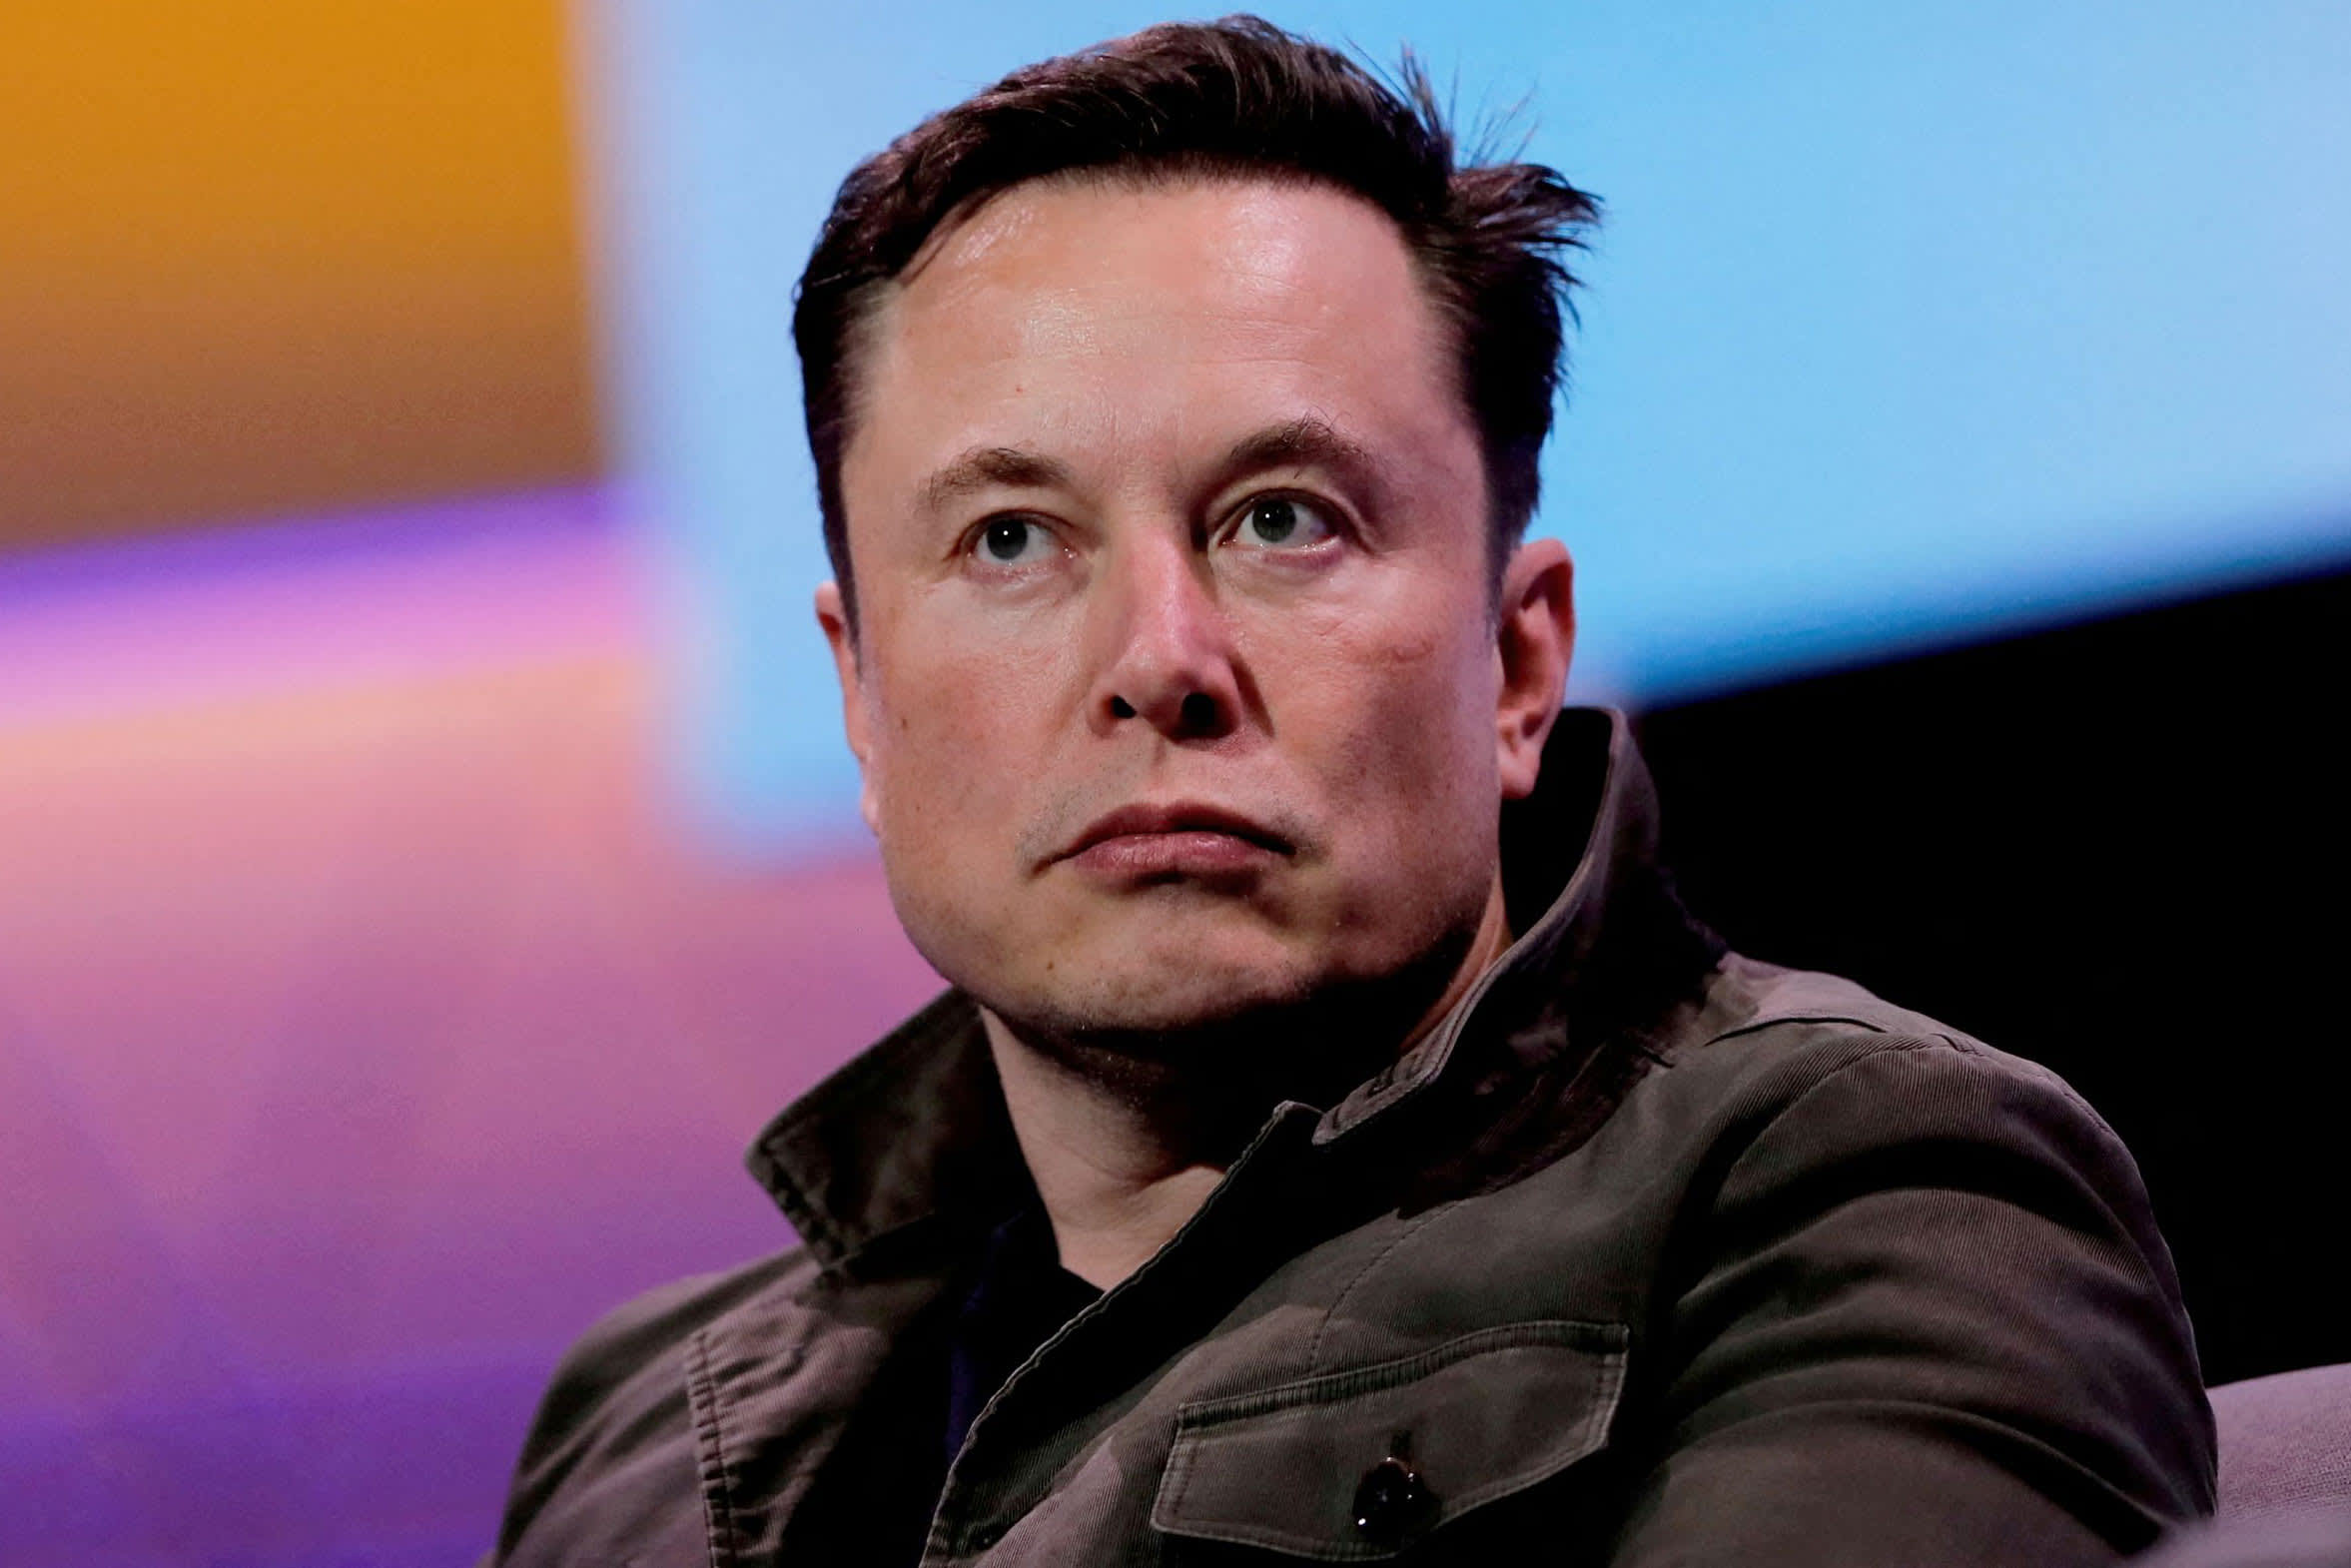 Elon Musk Poll: "Should I Step Down from Twitter?"